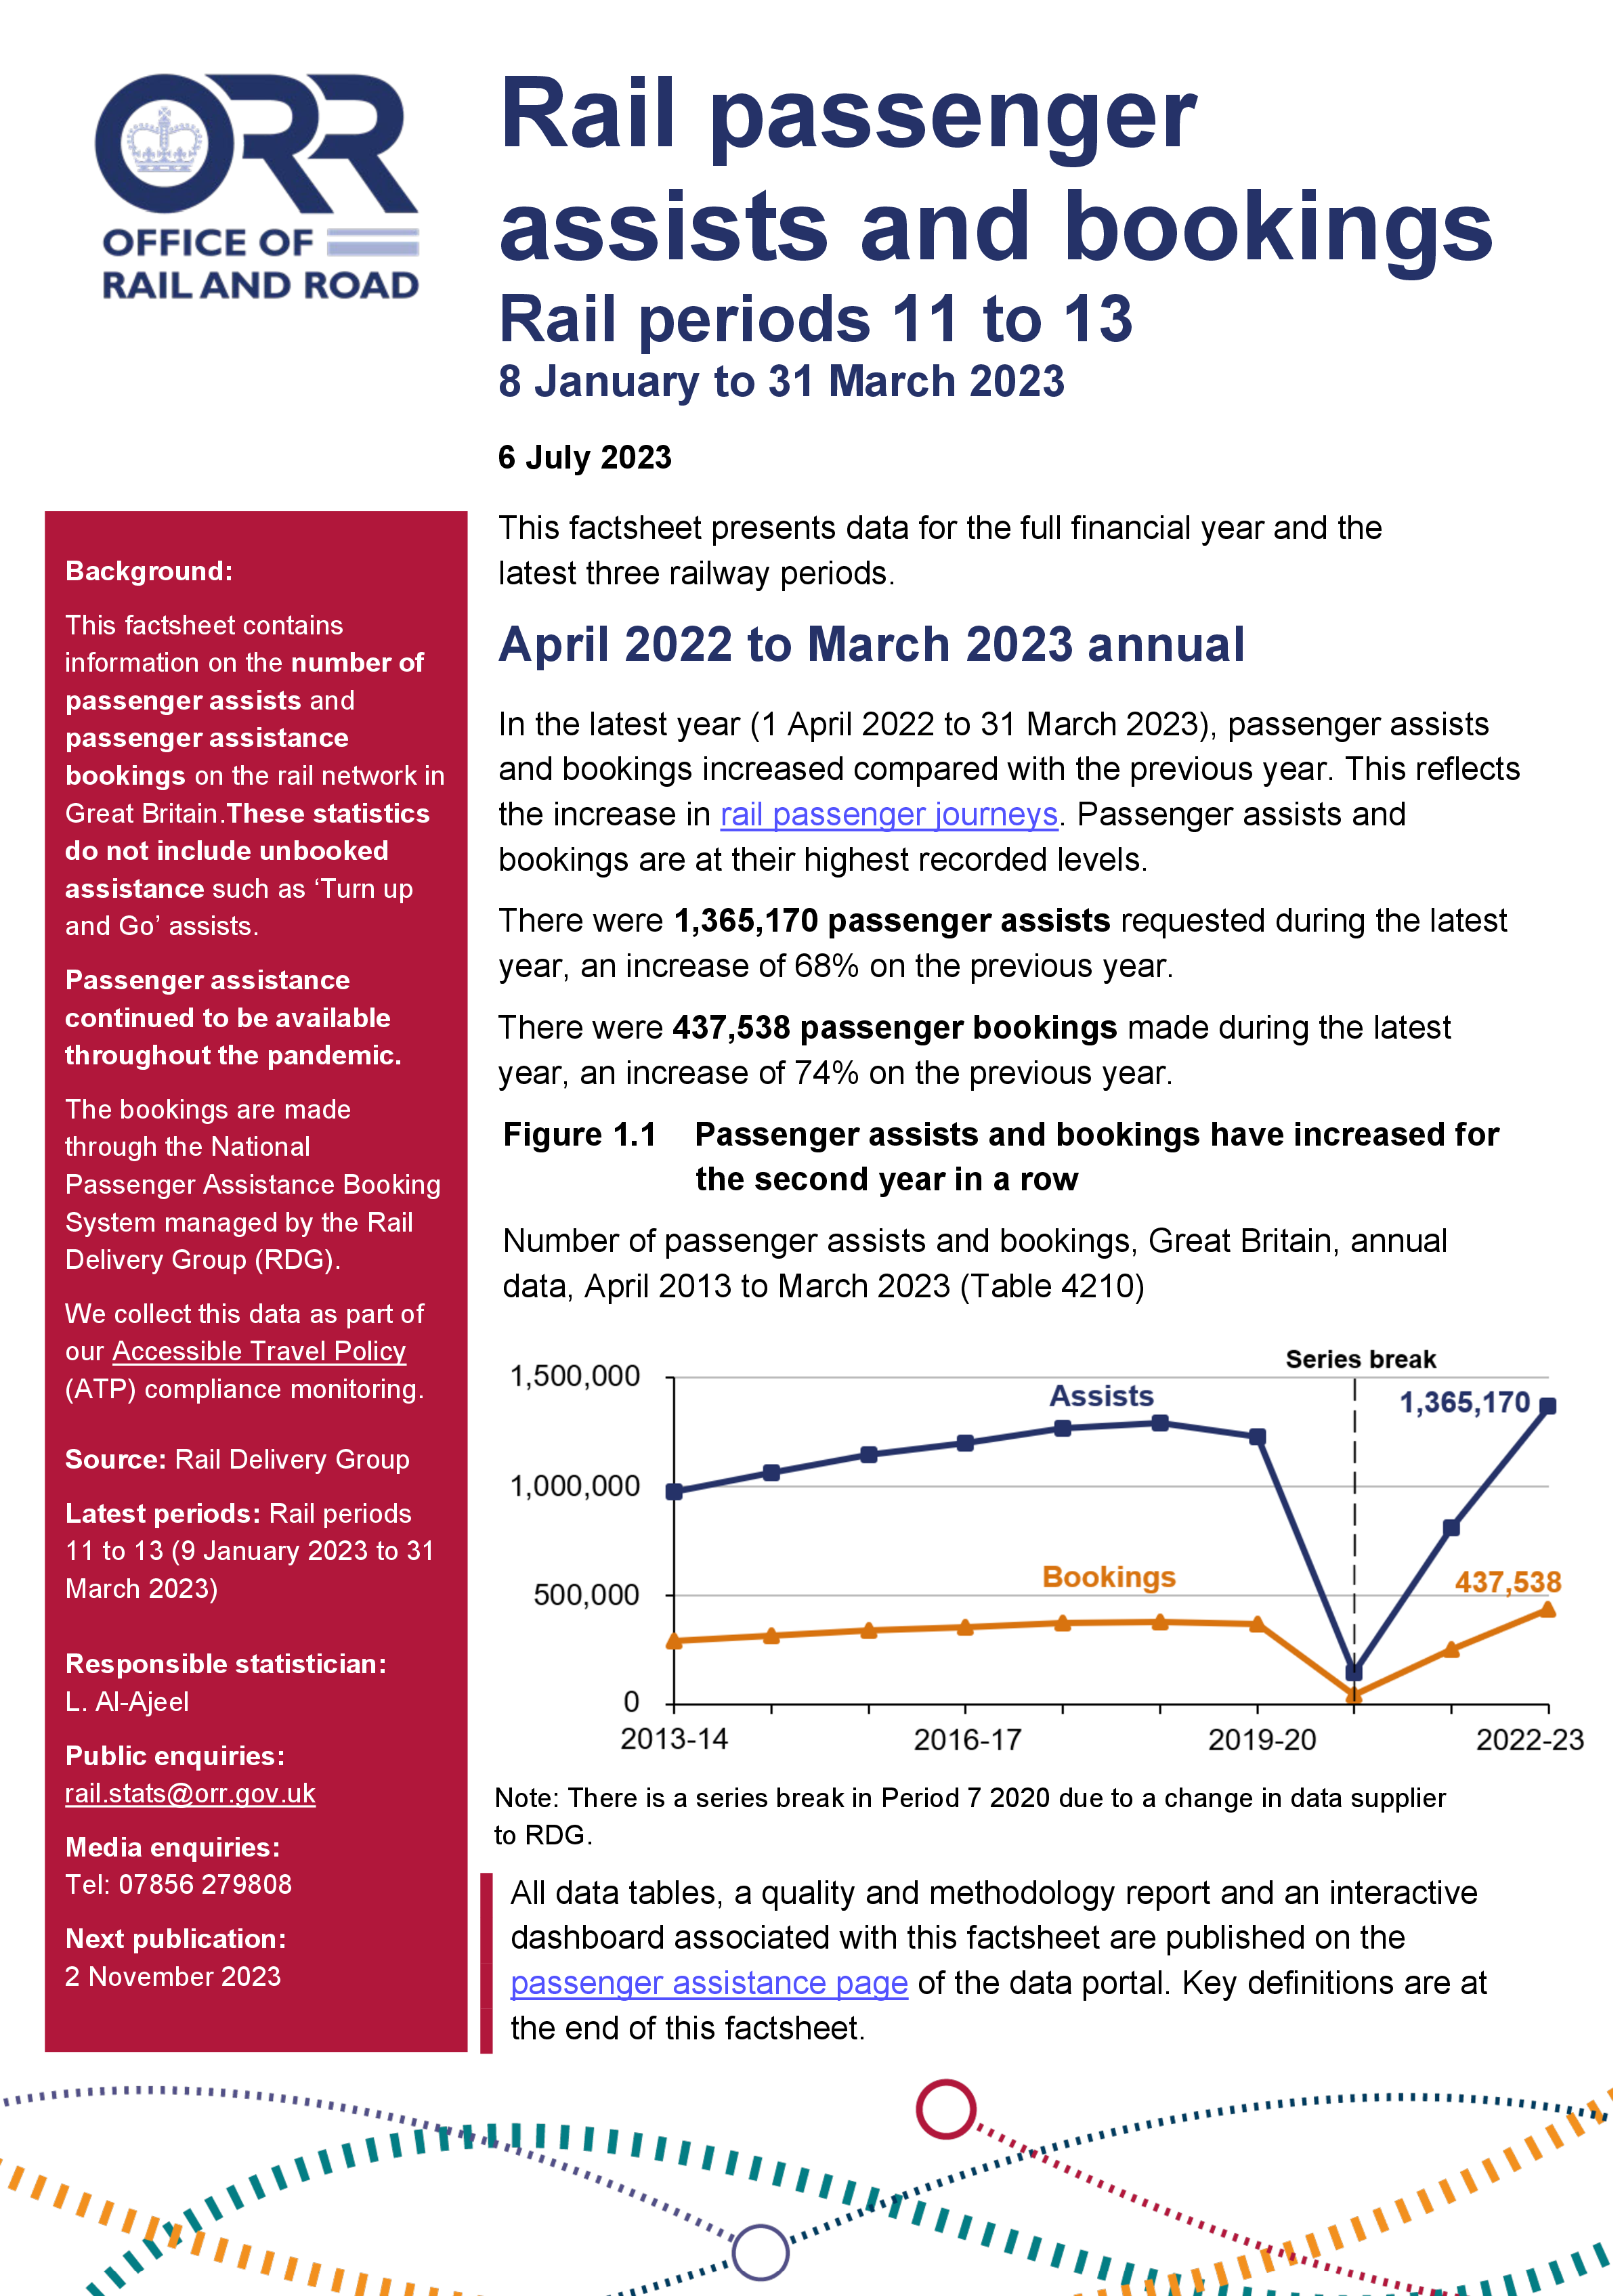 Rail passenger assists, rail periods 11 to 13 (8 January 2023 to 31 March 2023)